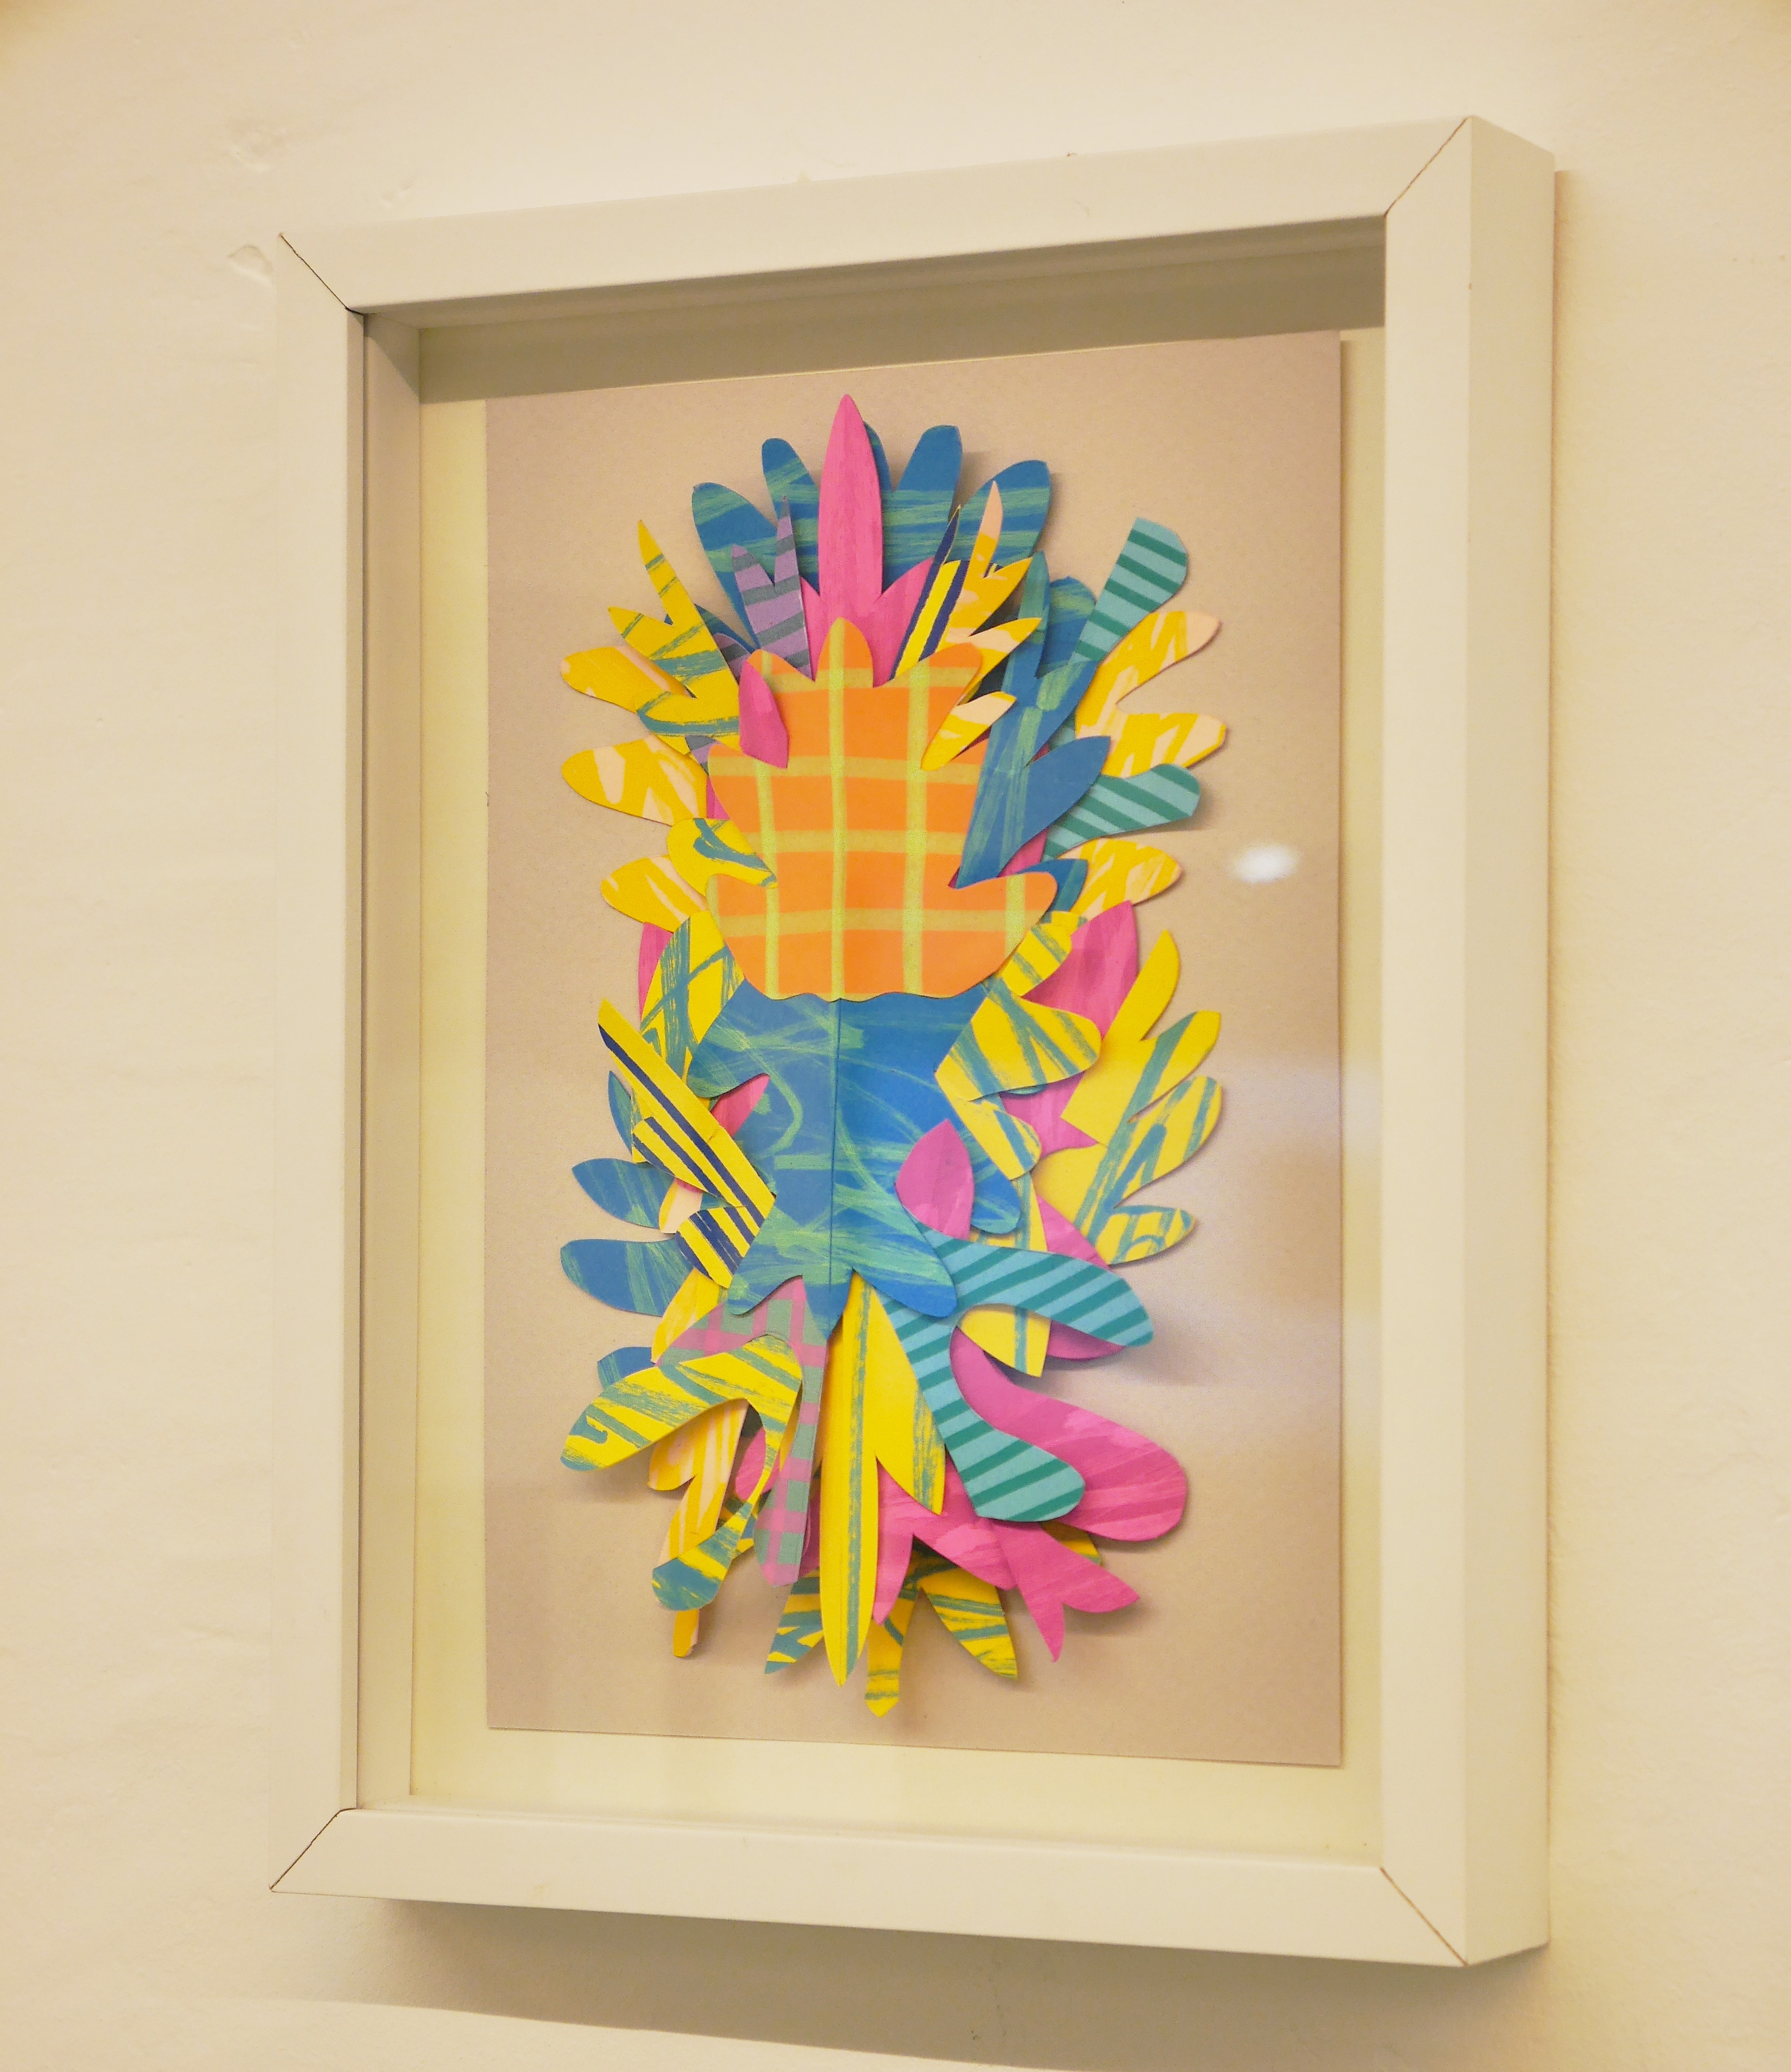 Paper artwork, framed and hanging on the wall. The artwork resembles an organic floral form, with similar silhouettes layered on top of each other in vibrant colors.